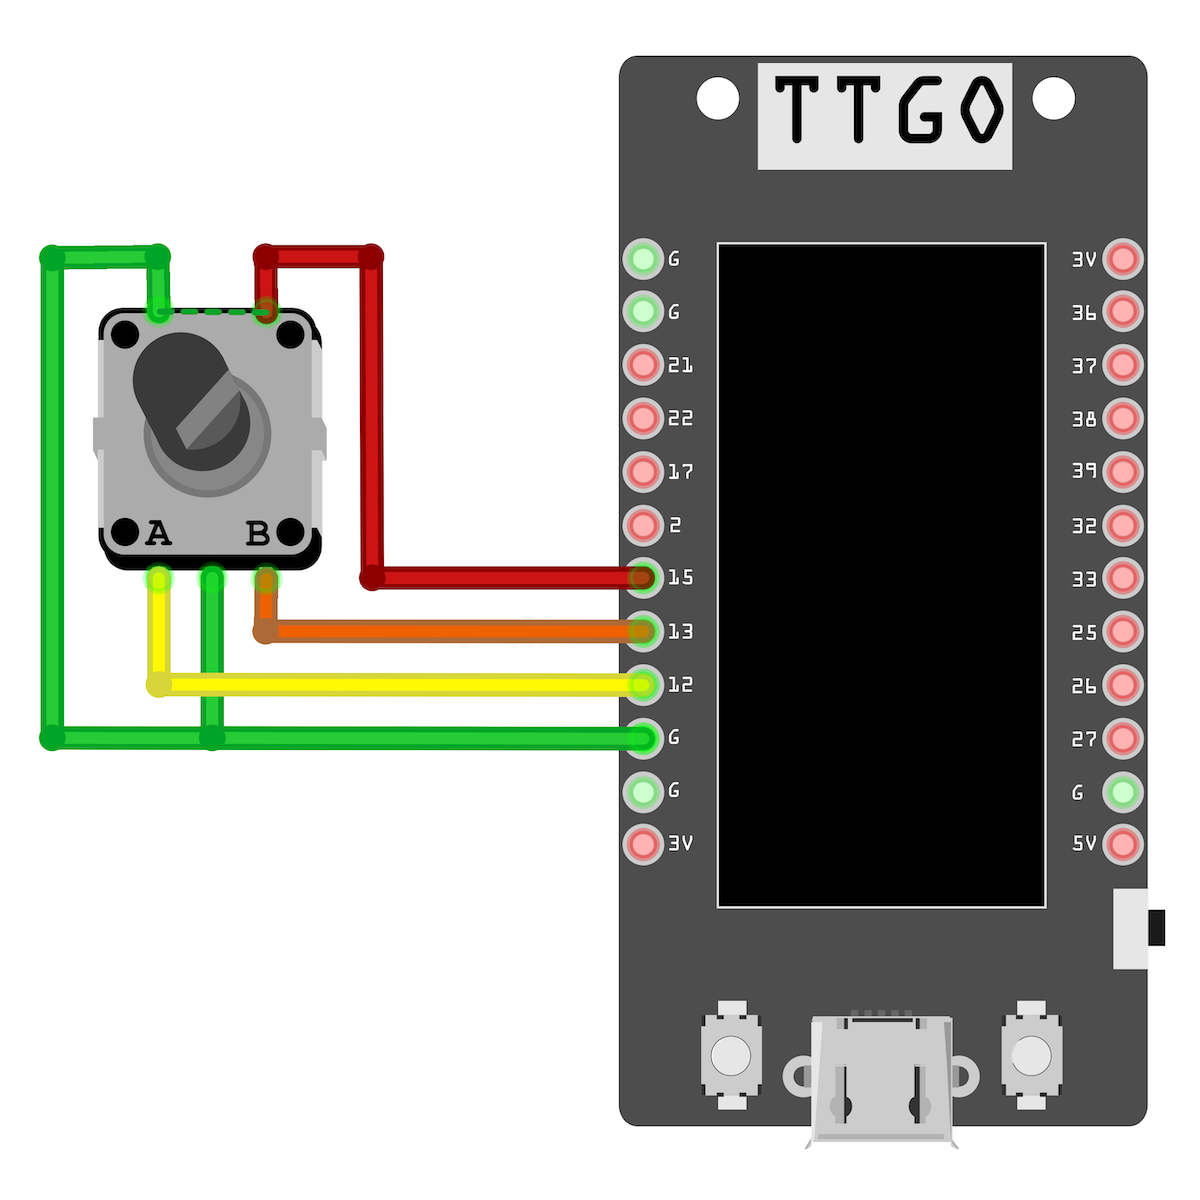 wiring diagram of rotary encoder with t-display board